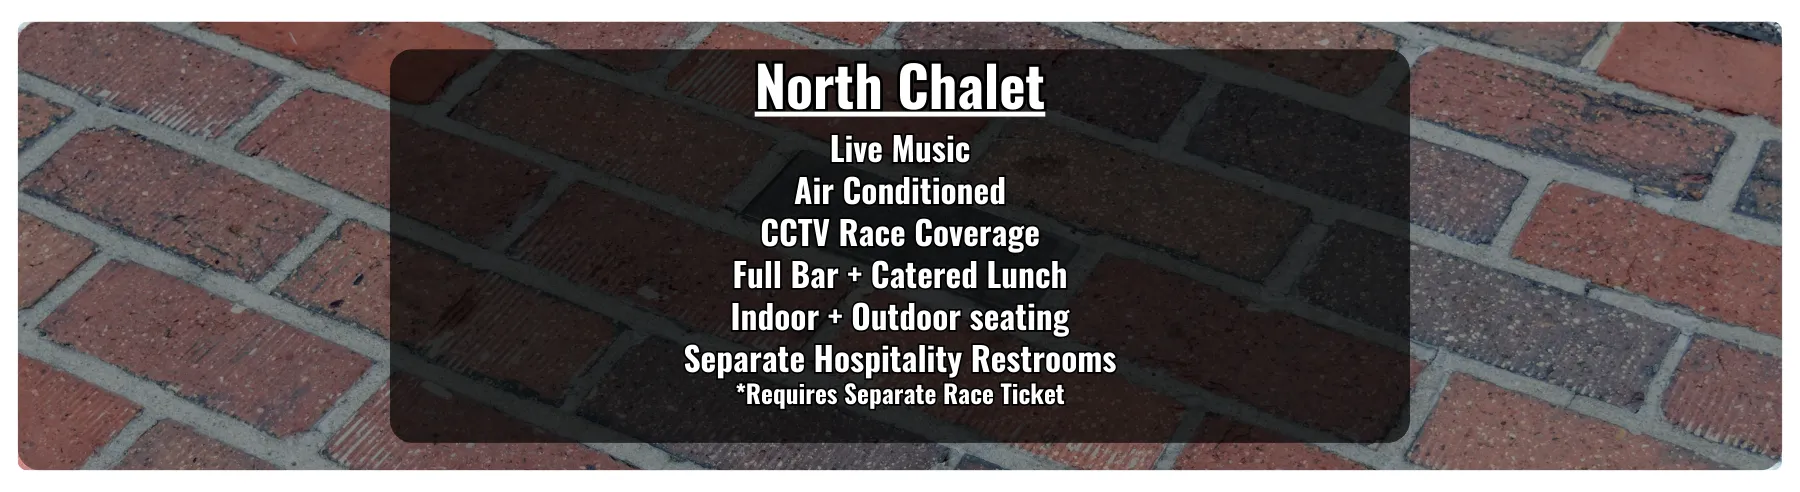 fanfare tickets indianapolis 500 north chalet hospitality features